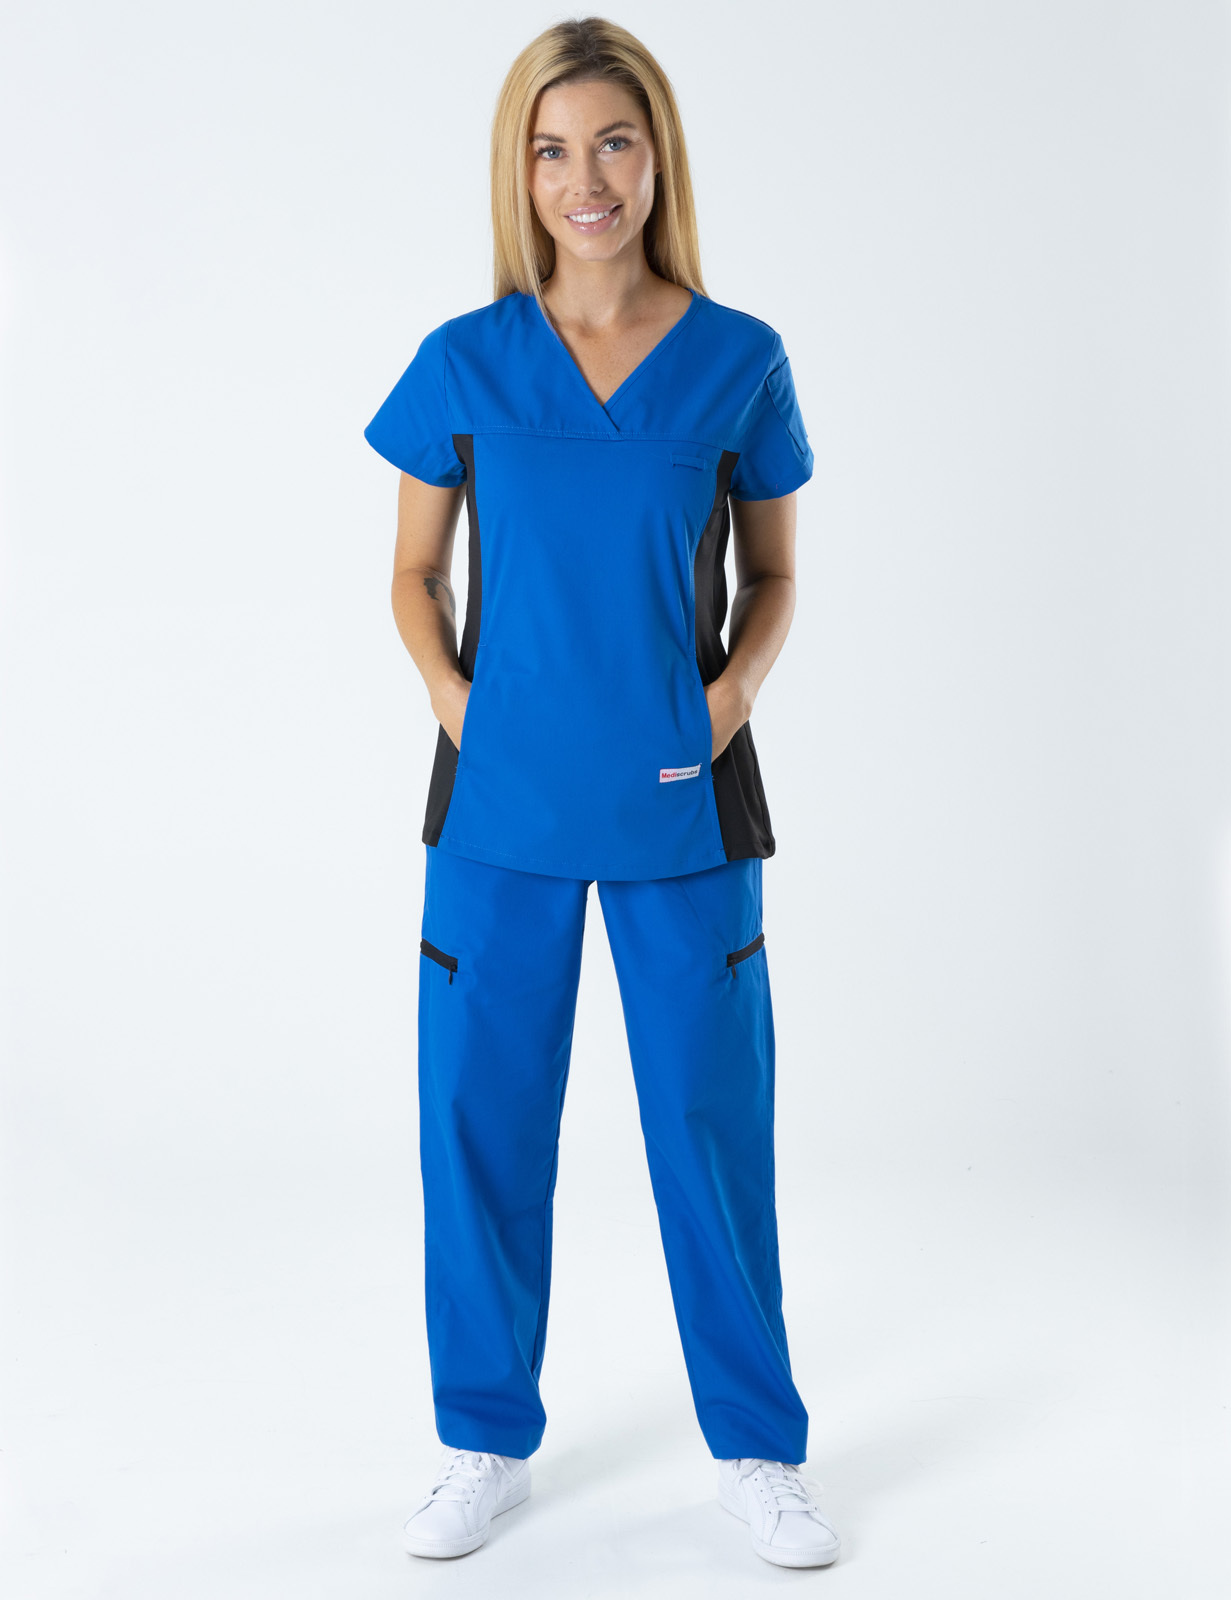 Women's Fit Solid Scrub Top With Spandex Panel - Royal - 3X Large